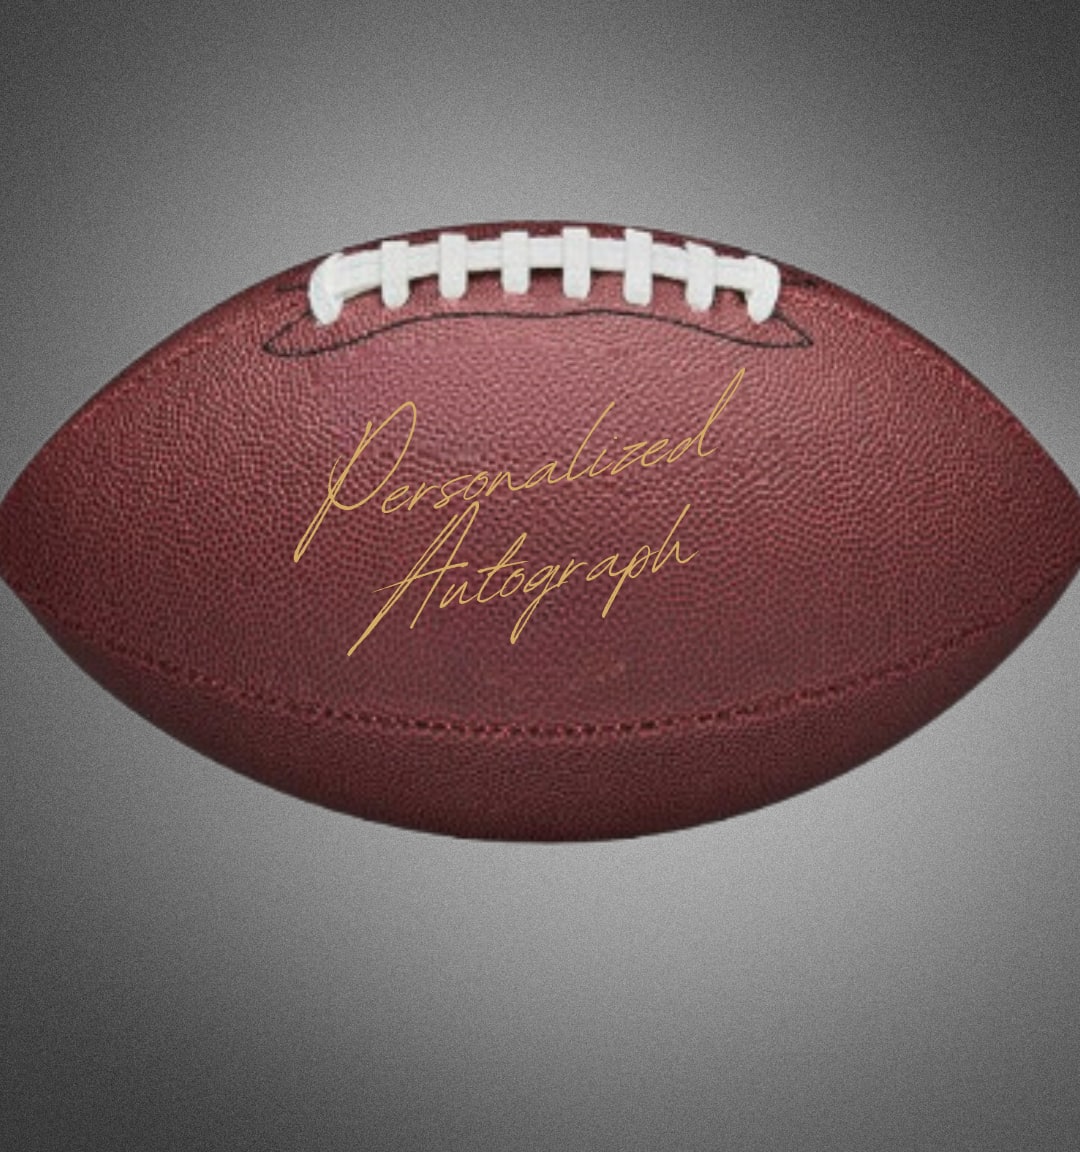 Limited Edition Brian Poole Jr. Autographed Football